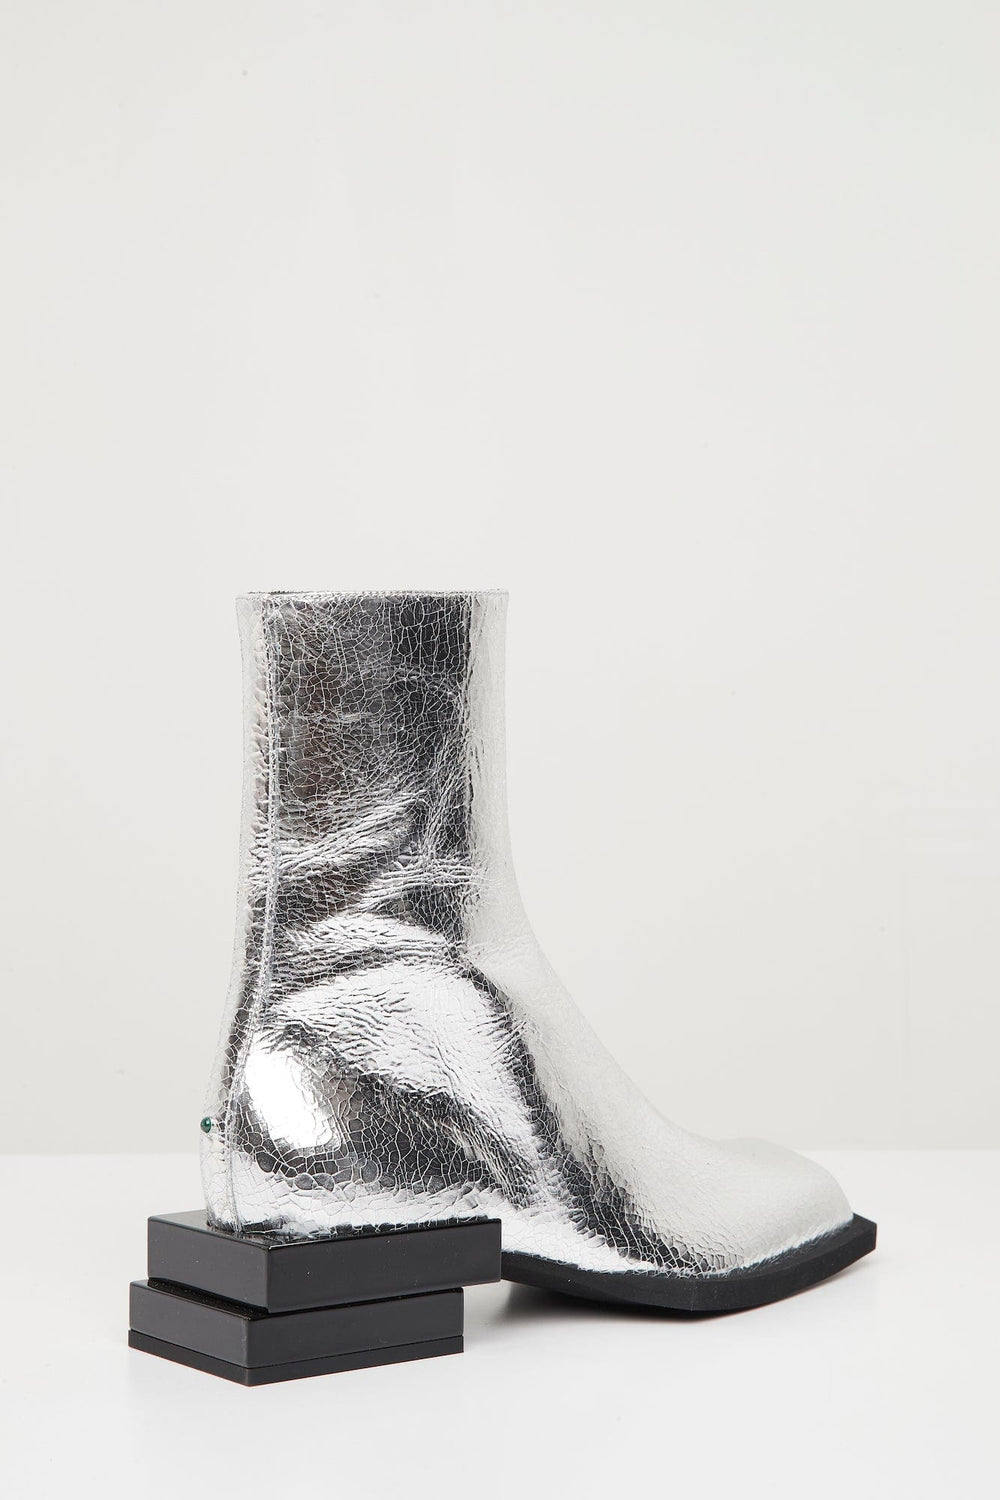 Steven Ma Stacked Heel Boots in Silver Cracked Foil Silver / 42